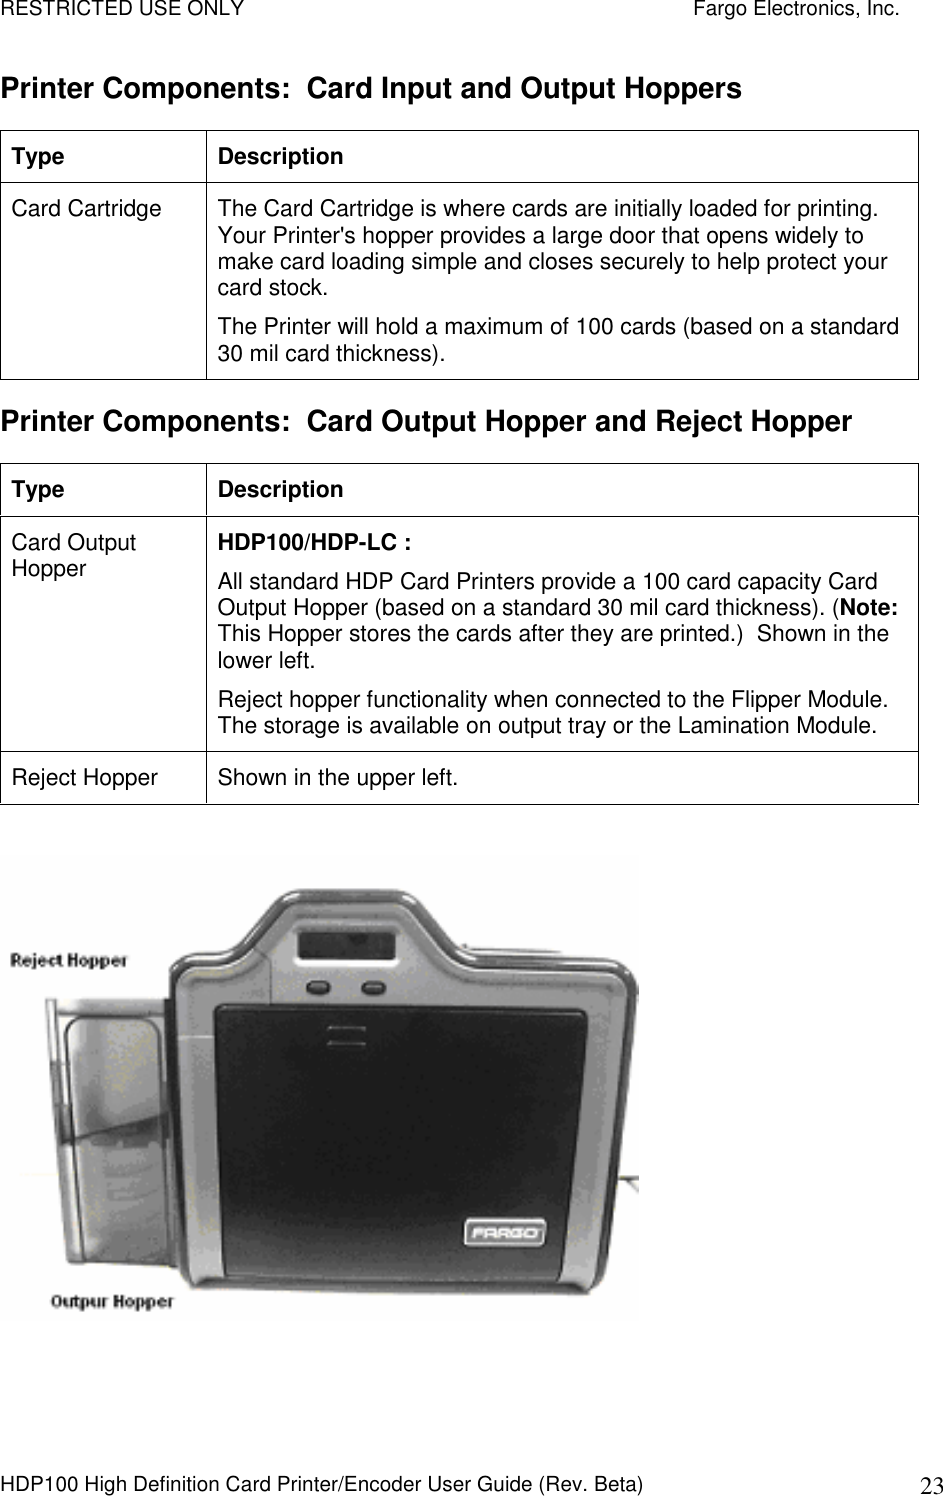 RESTRICTED USE ONLY    Fargo Electronics, Inc. HDP100 High Definition Card Printer/Encoder User Guide (Rev. Beta)  23 Printer Components:  Card Input and Output Hoppers Type  Description Card Cartridge    The Card Cartridge is where cards are initially loaded for printing. Your Printer&apos;s hopper provides a large door that opens widely to make card loading simple and closes securely to help protect your card stock.  The Printer will hold a maximum of 100 cards (based on a standard 30 mil card thickness). Printer Components:  Card Output Hopper and Reject Hopper Type  Description Card Output Hopper  HDP100/HDP-LC : All standard HDP Card Printers provide a 100 card capacity Card Output Hopper (based on a standard 30 mil card thickness). (Note:  This Hopper stores the cards after they are printed.)  Shown in the lower left. Reject hopper functionality when connected to the Flipper Module. The storage is available on output tray or the Lamination Module. Reject Hopper  Shown in the upper left.   